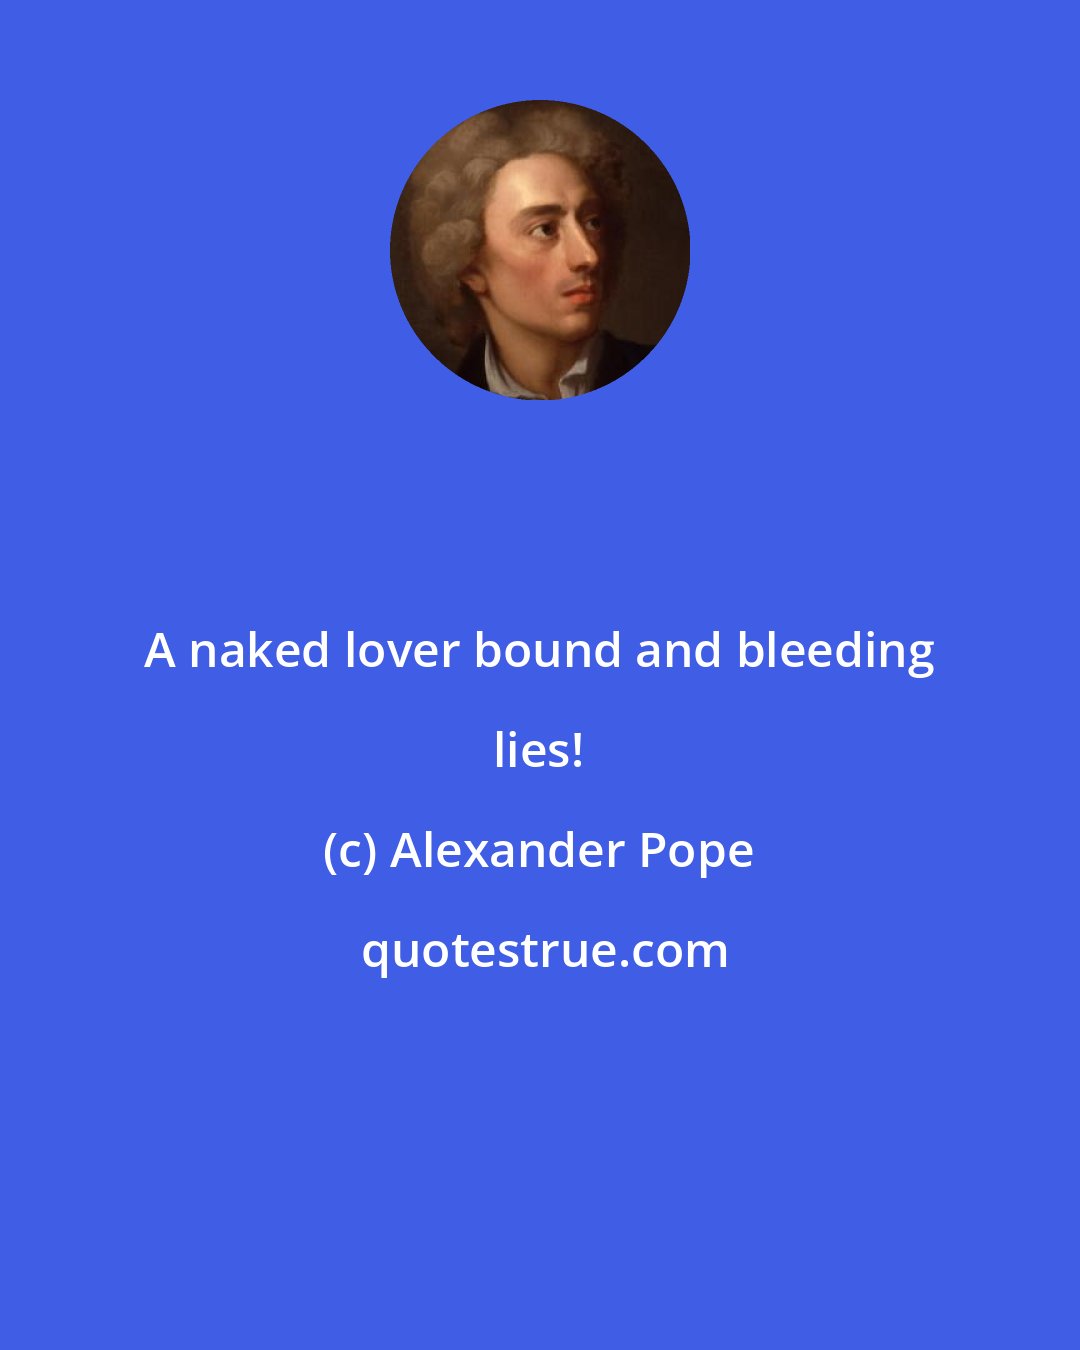 Alexander Pope: A naked lover bound and bleeding lies!